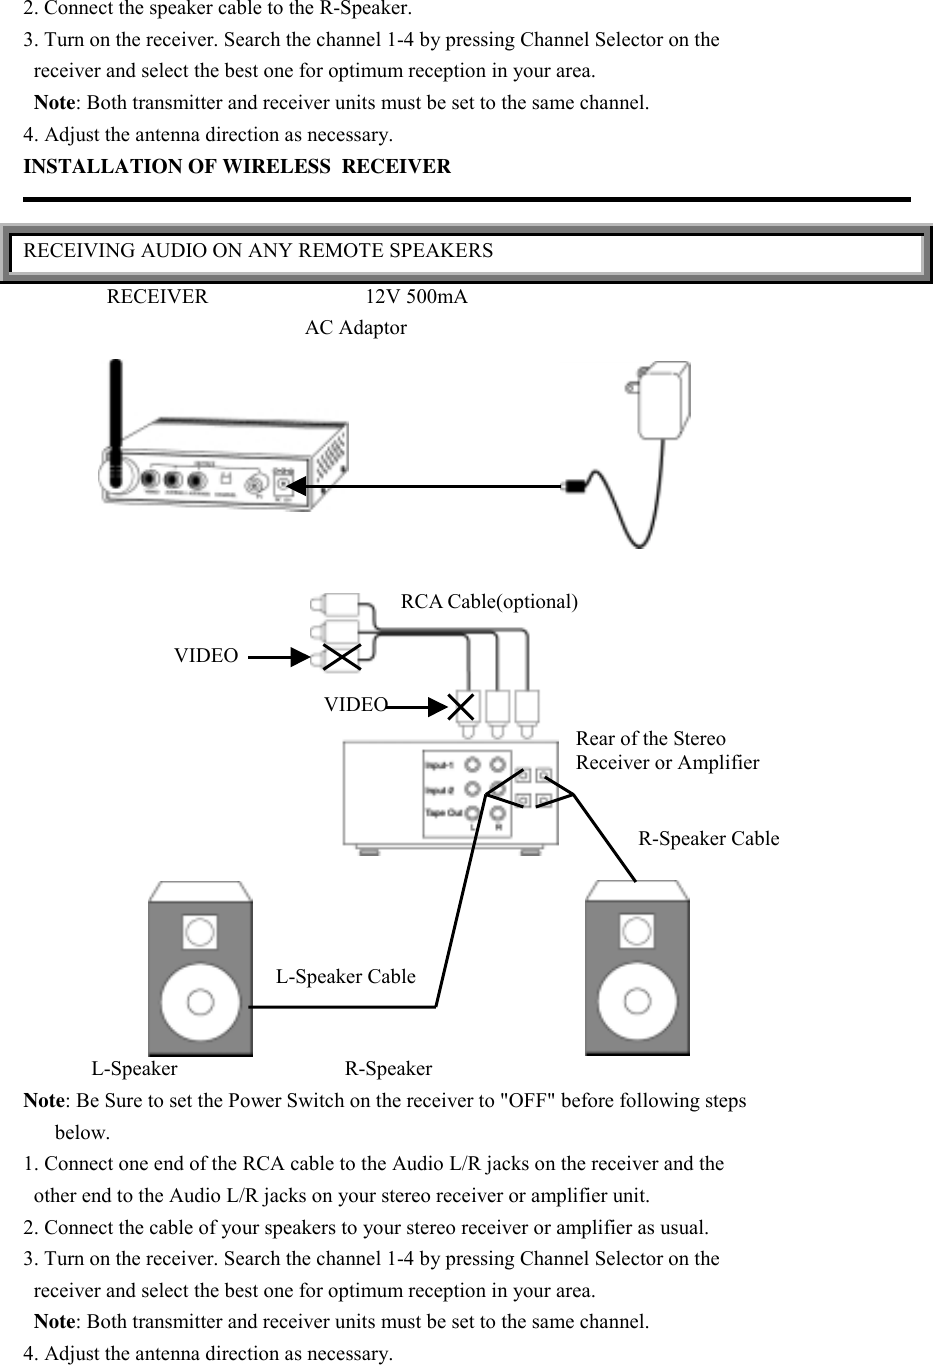 2. Connect the speaker cable to the R-Speaker.3. Turn on the receiver. Search the channel 1-4 by pressing Channel Selector on the  receiver and select the best one for optimum reception in your area.  Note: Both transmitter and receiver units must be set to the same channel.4. Adjust the antenna direction as necessary.INSTALLATION OF WIRELESS  RECEIVERRECEIVING AUDIO ON ANY REMOTE SPEAKERS                RECEIVER                              12V 500mA                                                      AC Adaptor             L-Speaker                                R-SpeakerNote: Be Sure to set the Power Switch on the receiver to &quot;OFF&quot; before following steps      below.1. Connect one end of the RCA cable to the Audio L/R jacks on the receiver and the  other end to the Audio L/R jacks on your stereo receiver or amplifier unit.2. Connect the cable of your speakers to your stereo receiver or amplifier as usual.3. Turn on the receiver. Search the channel 1-4 by pressing Channel Selector on the  receiver and select the best one for optimum reception in your area.  Note: Both transmitter and receiver units must be set to the same channel.4. Adjust the antenna direction as necessary.VIDEOVIDEORCA Cable(optional)Rear of the StereoReceiver or AmplifierL-Speaker CableR-Speaker Cable